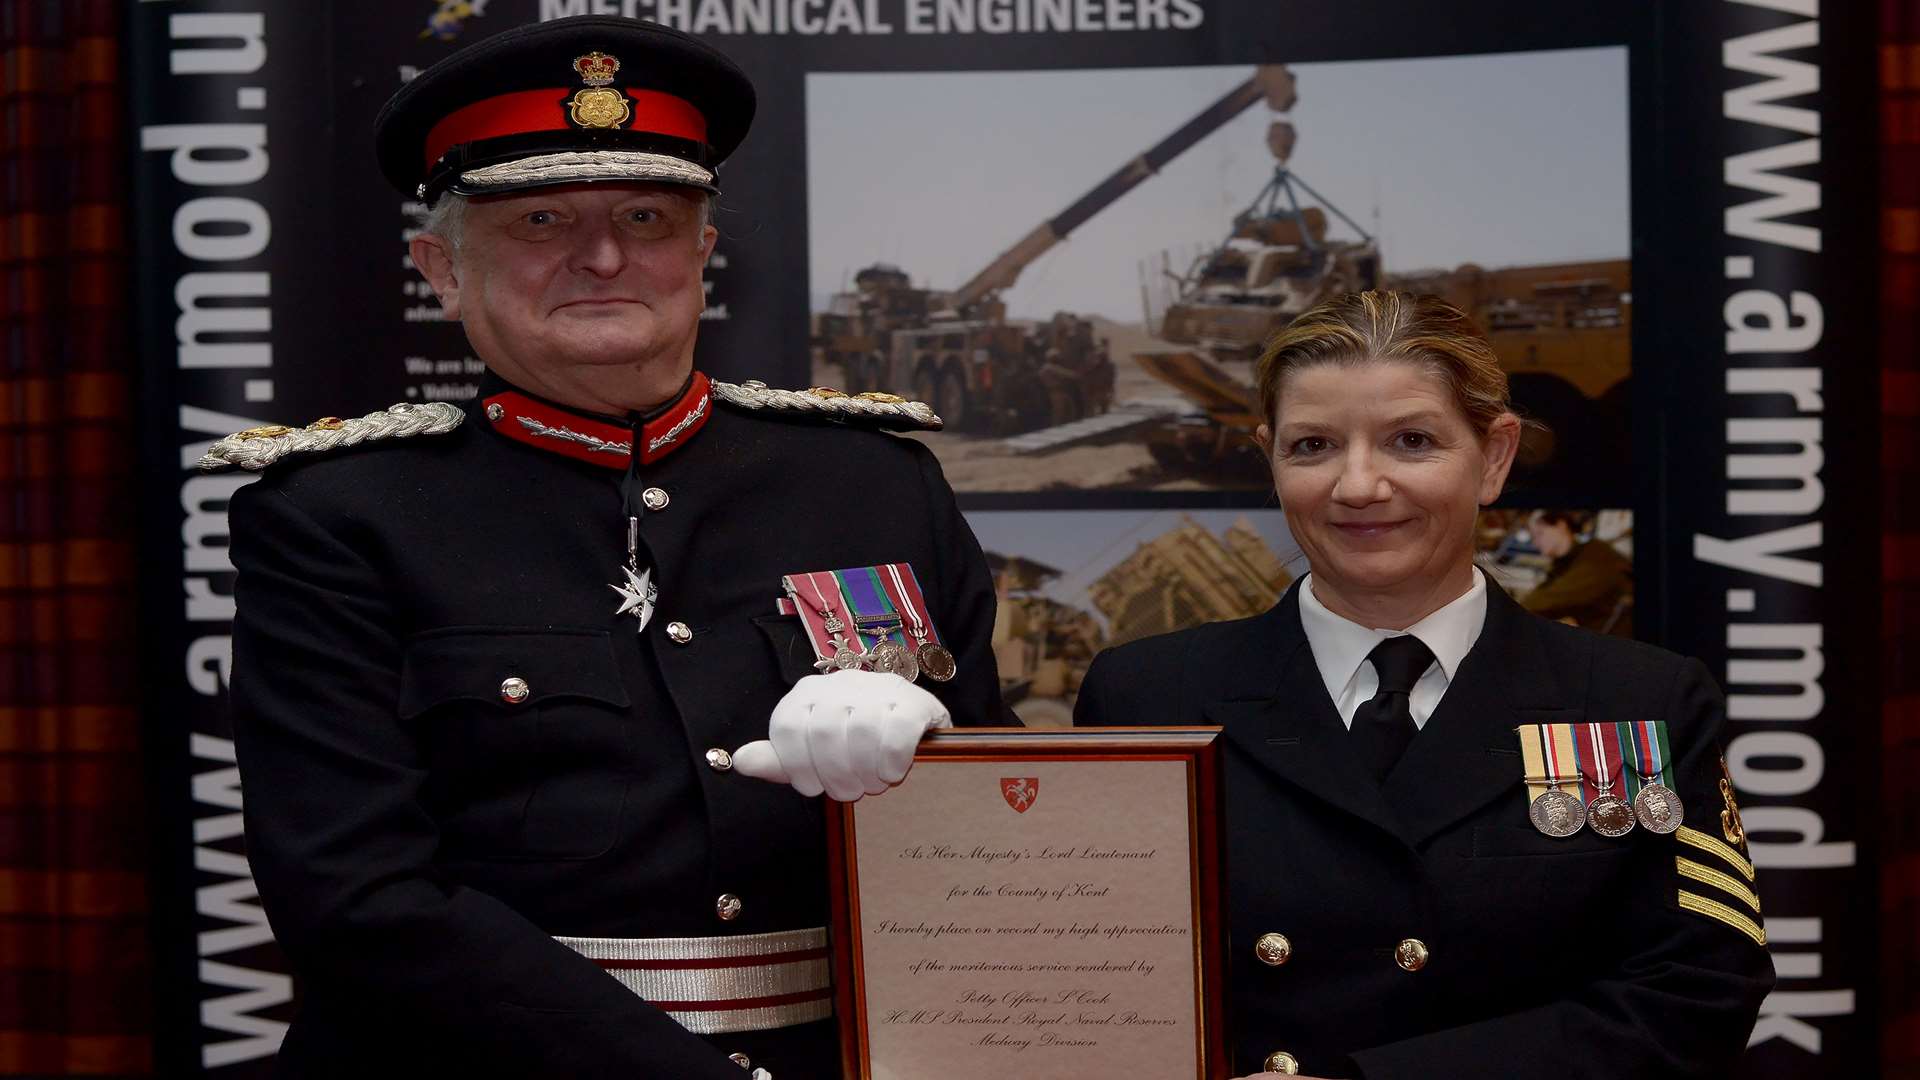 The Lord-Lieutenant of Kent, Viscount De L’Isle MBE presents Petty Officer Lynn Cook with a Certificate for Meritorious Service in recognition of her outstanding loyalty and commitment to the Reserve Forces